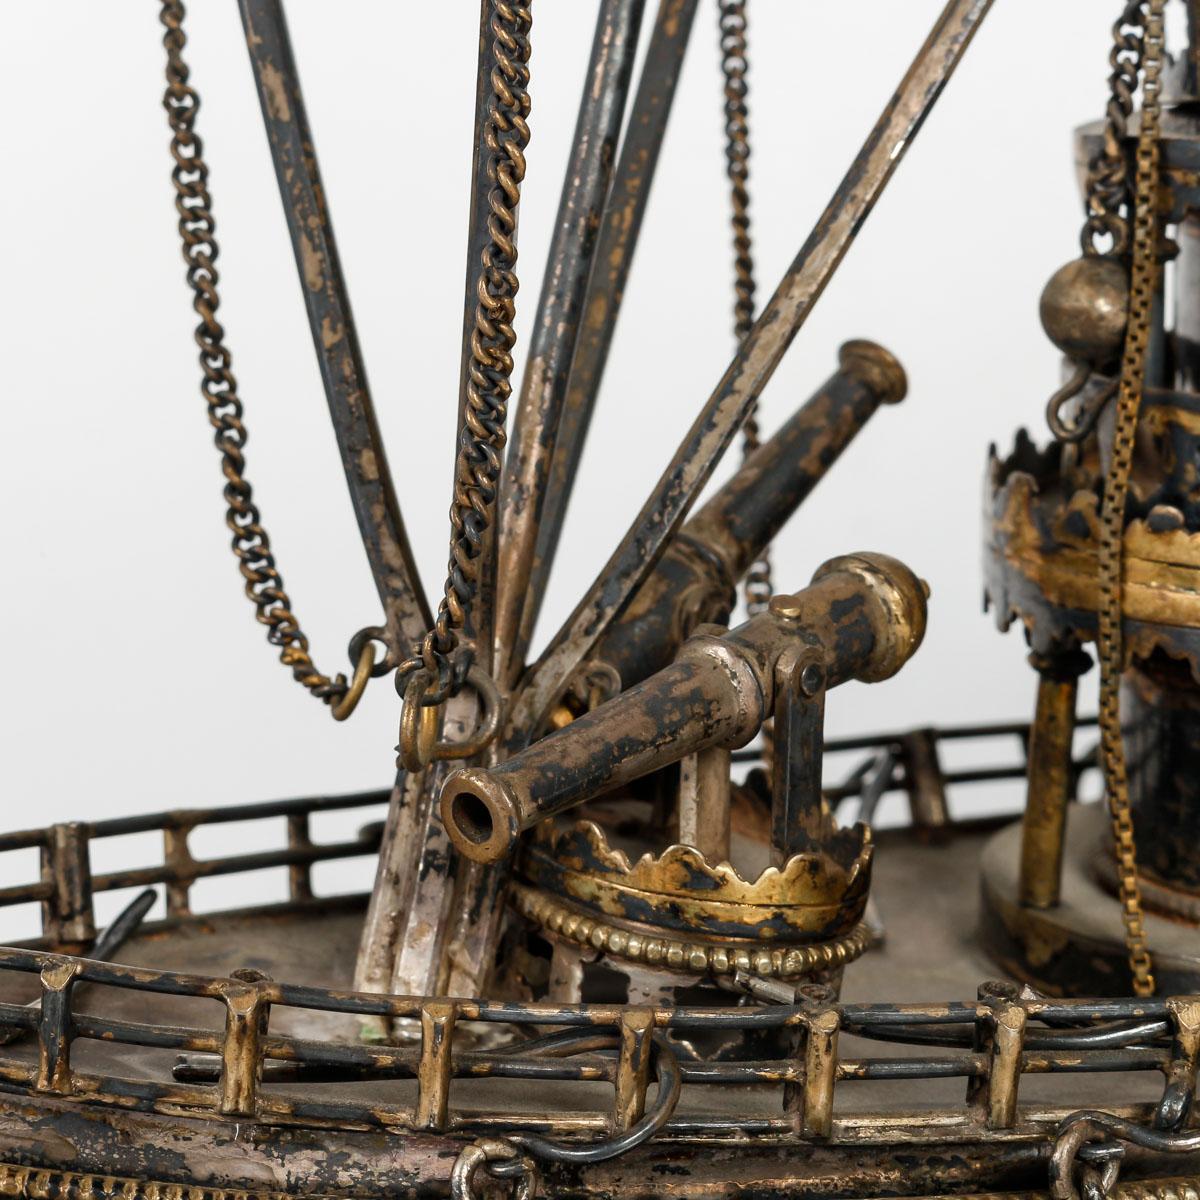 Miniature Army Boat in Sterling Silver, 19th Century, English Work. For Sale 3